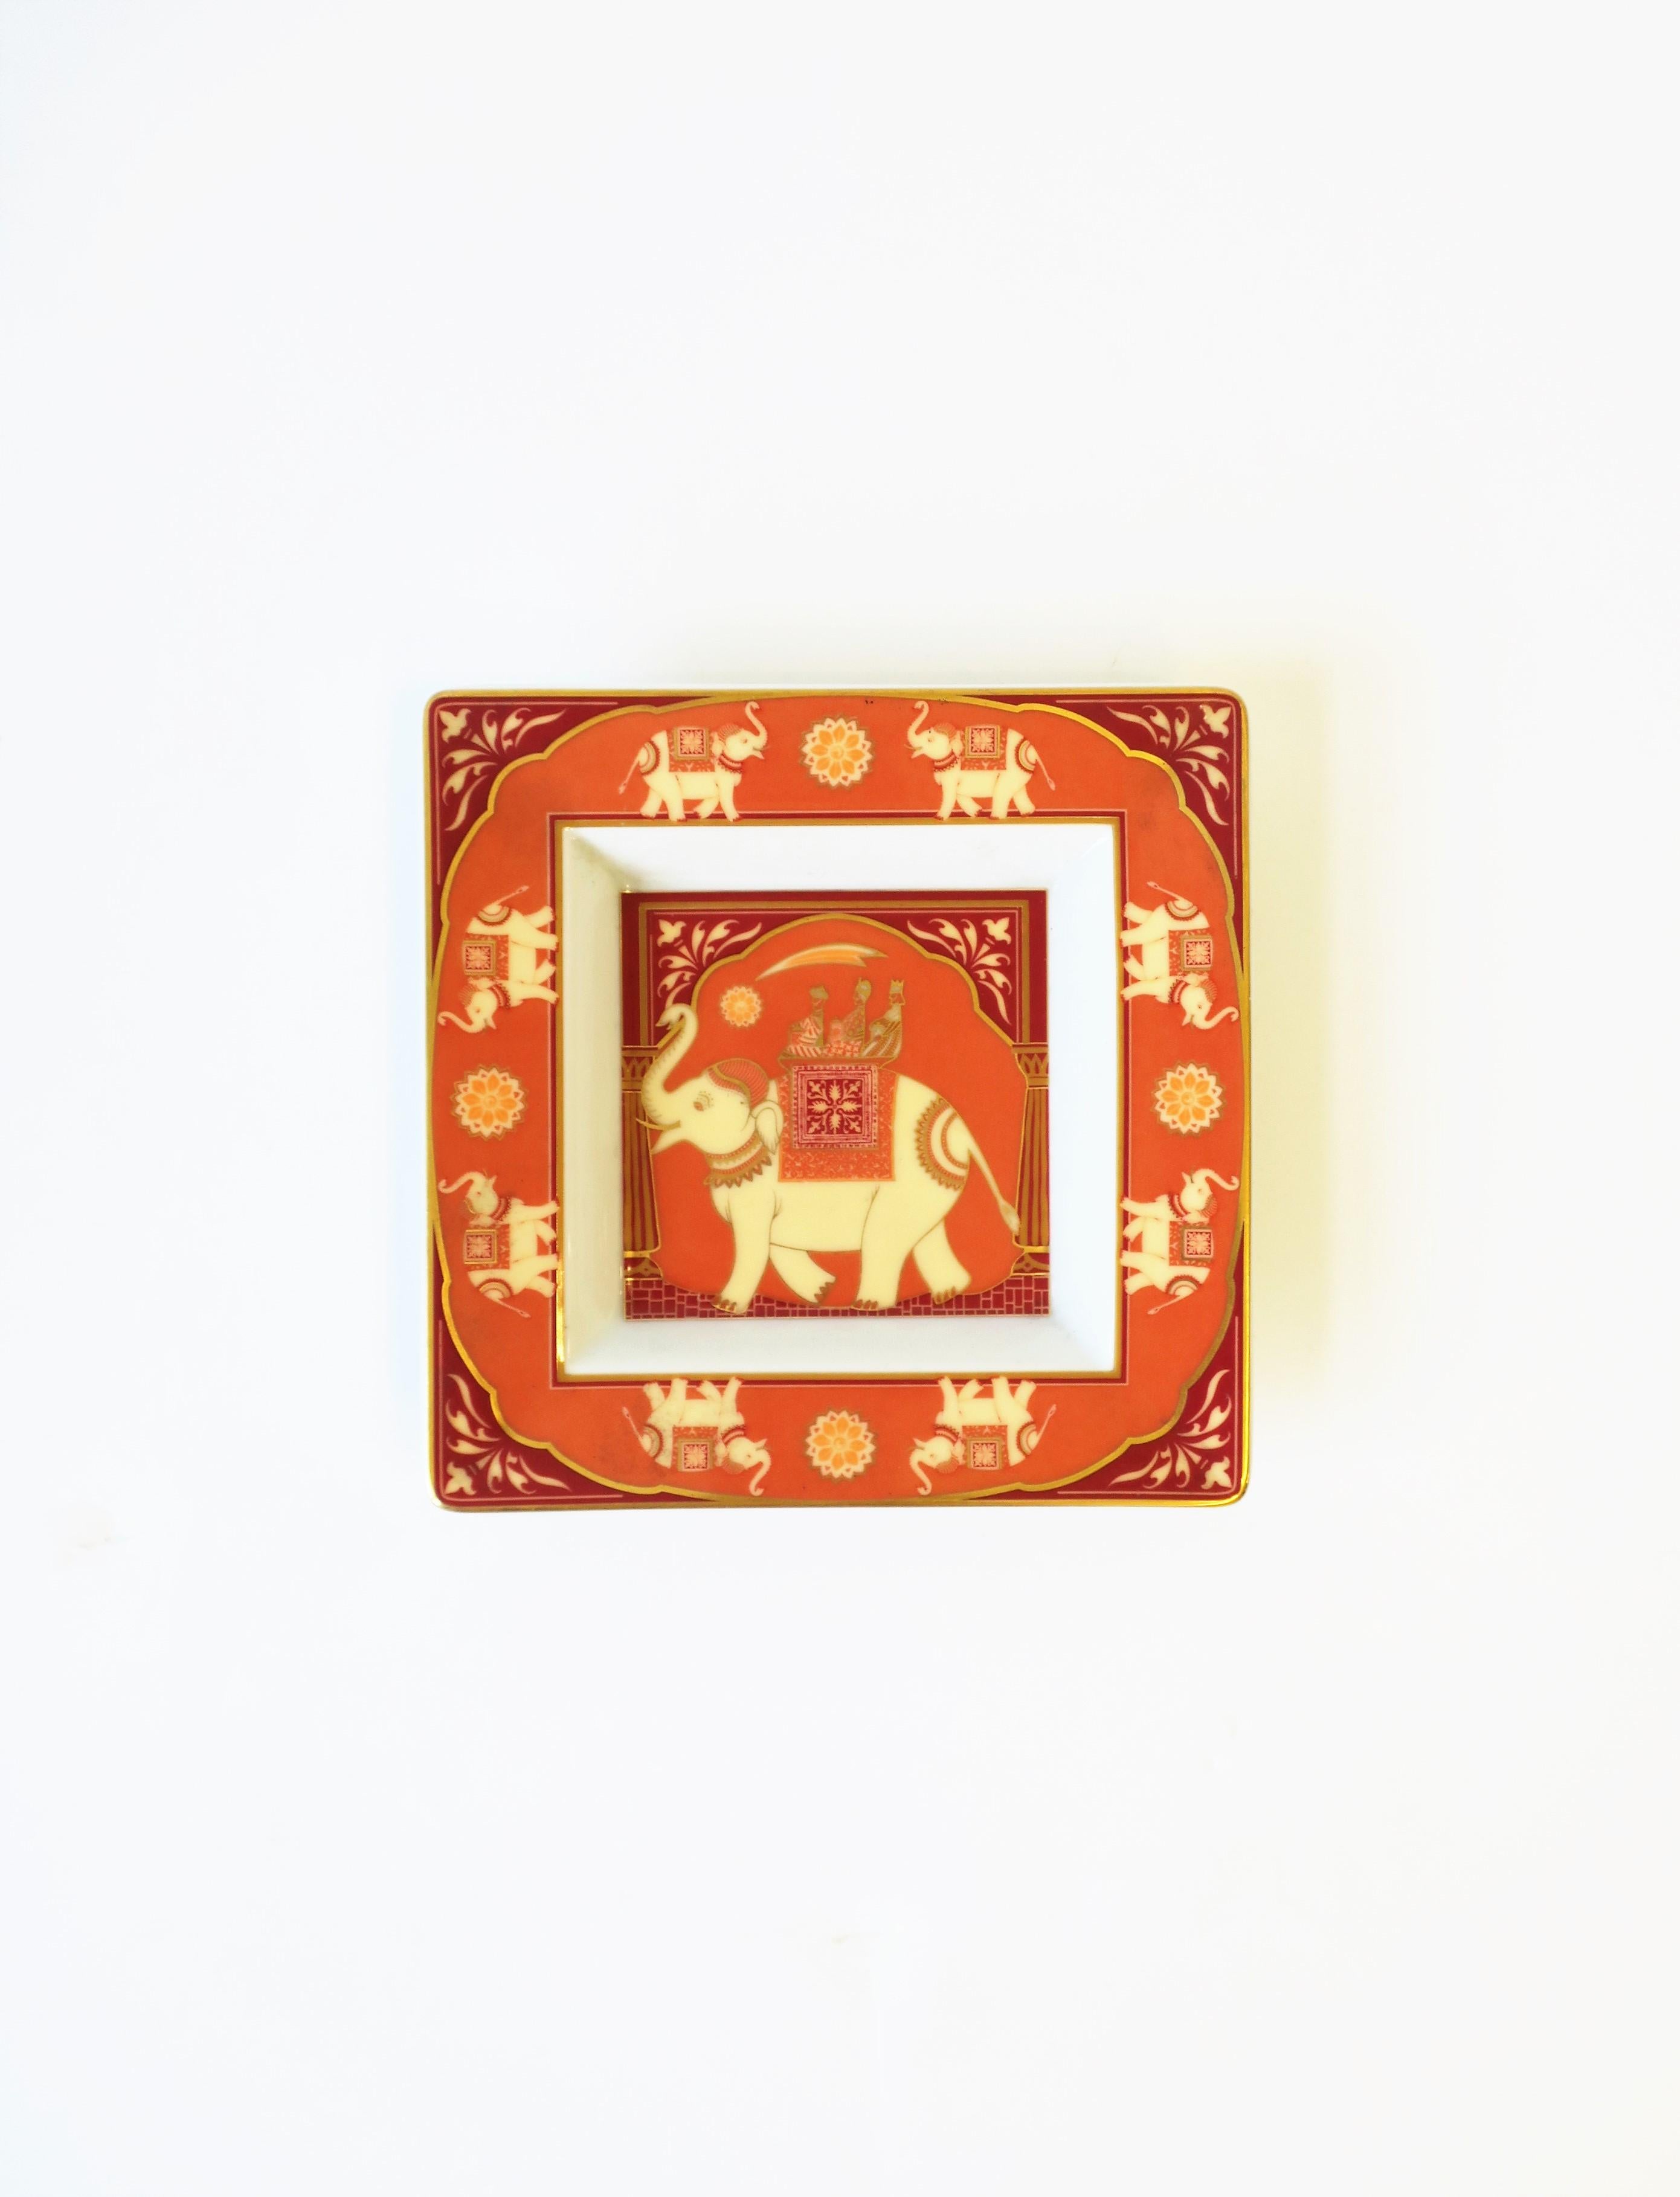 A beautiful German white porcelain jewelry dish with Elephant design by Rosenthal, circa 20th century, Germany. Dish is square with large elephant at center, smaller elephants around edge, with hues of orange, cream, red burgundy, and touches of